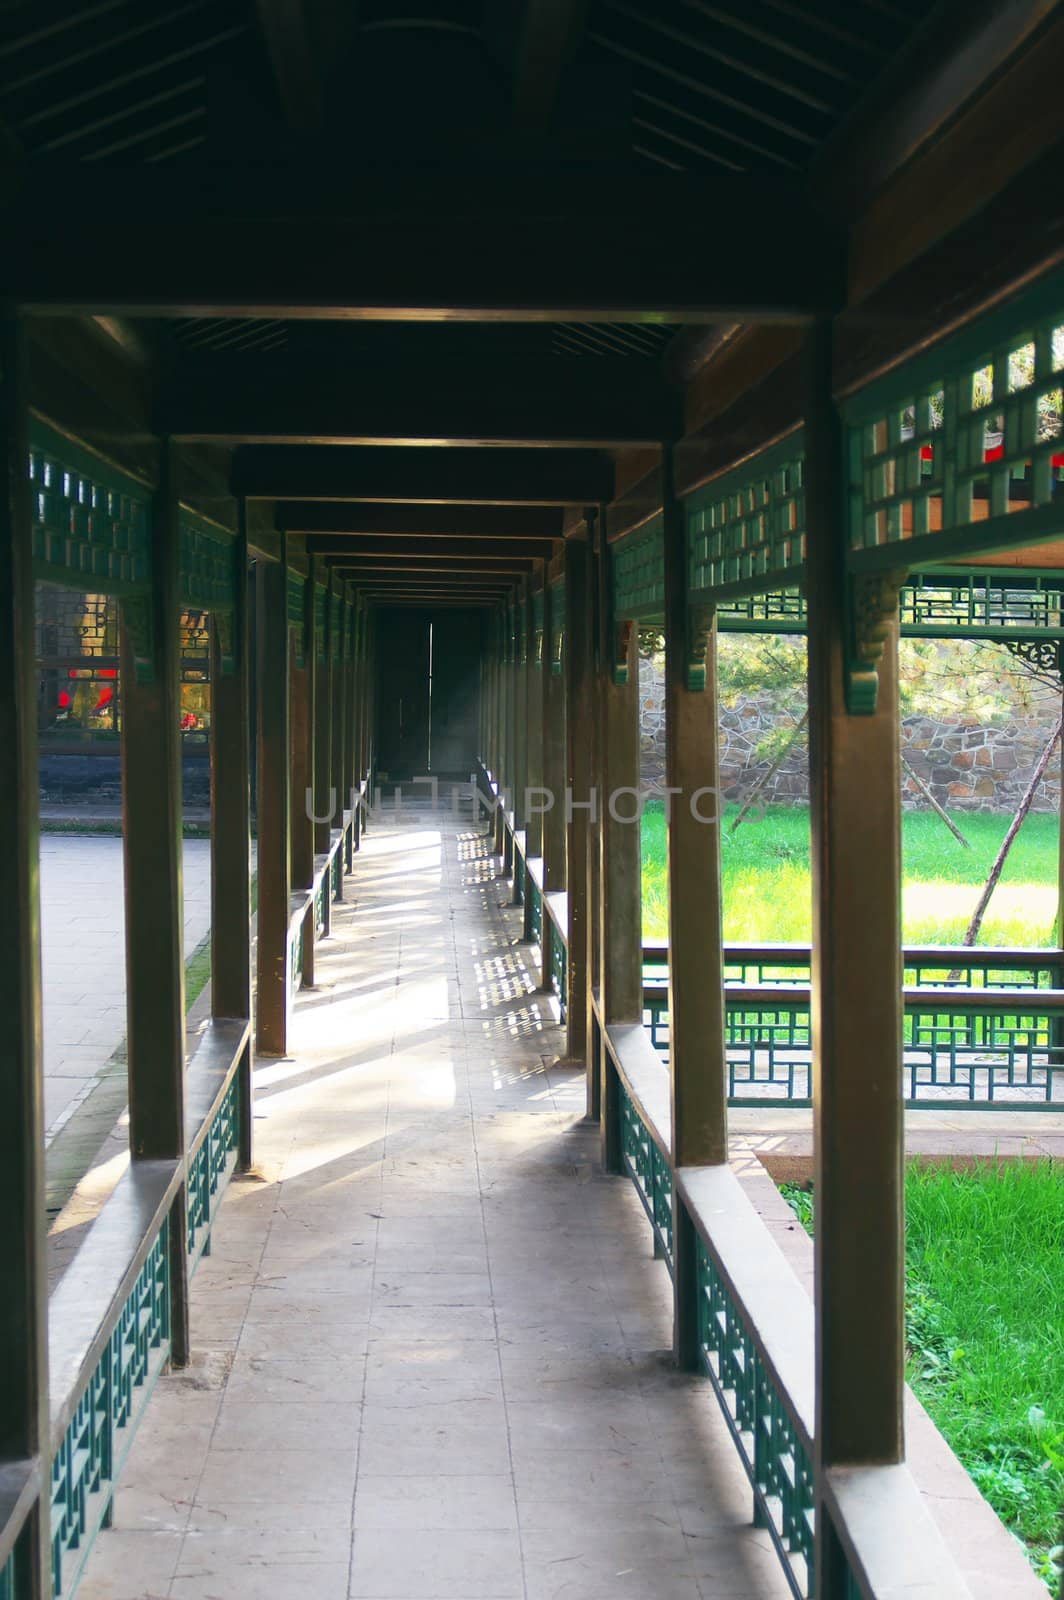 Corridor in Chengde Imperial Summer Resort , Hebei province, China